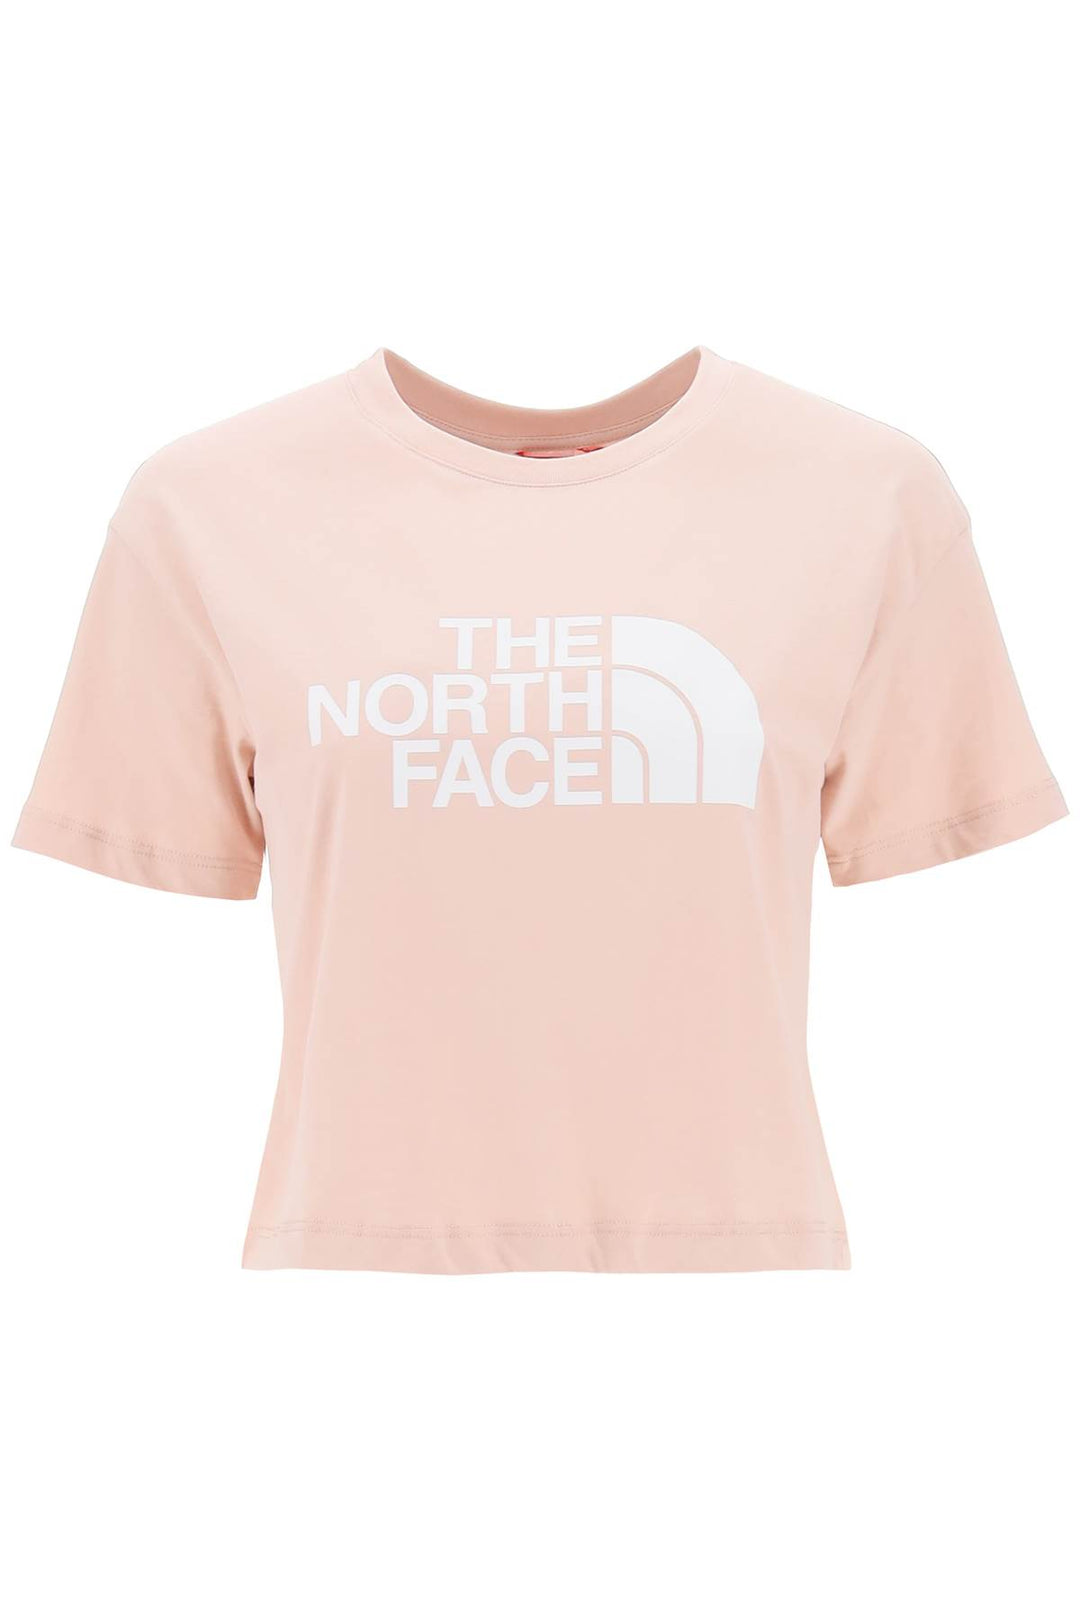 T Shirt Cropped 'Easy' Stampa Logo - The North Face - Donna